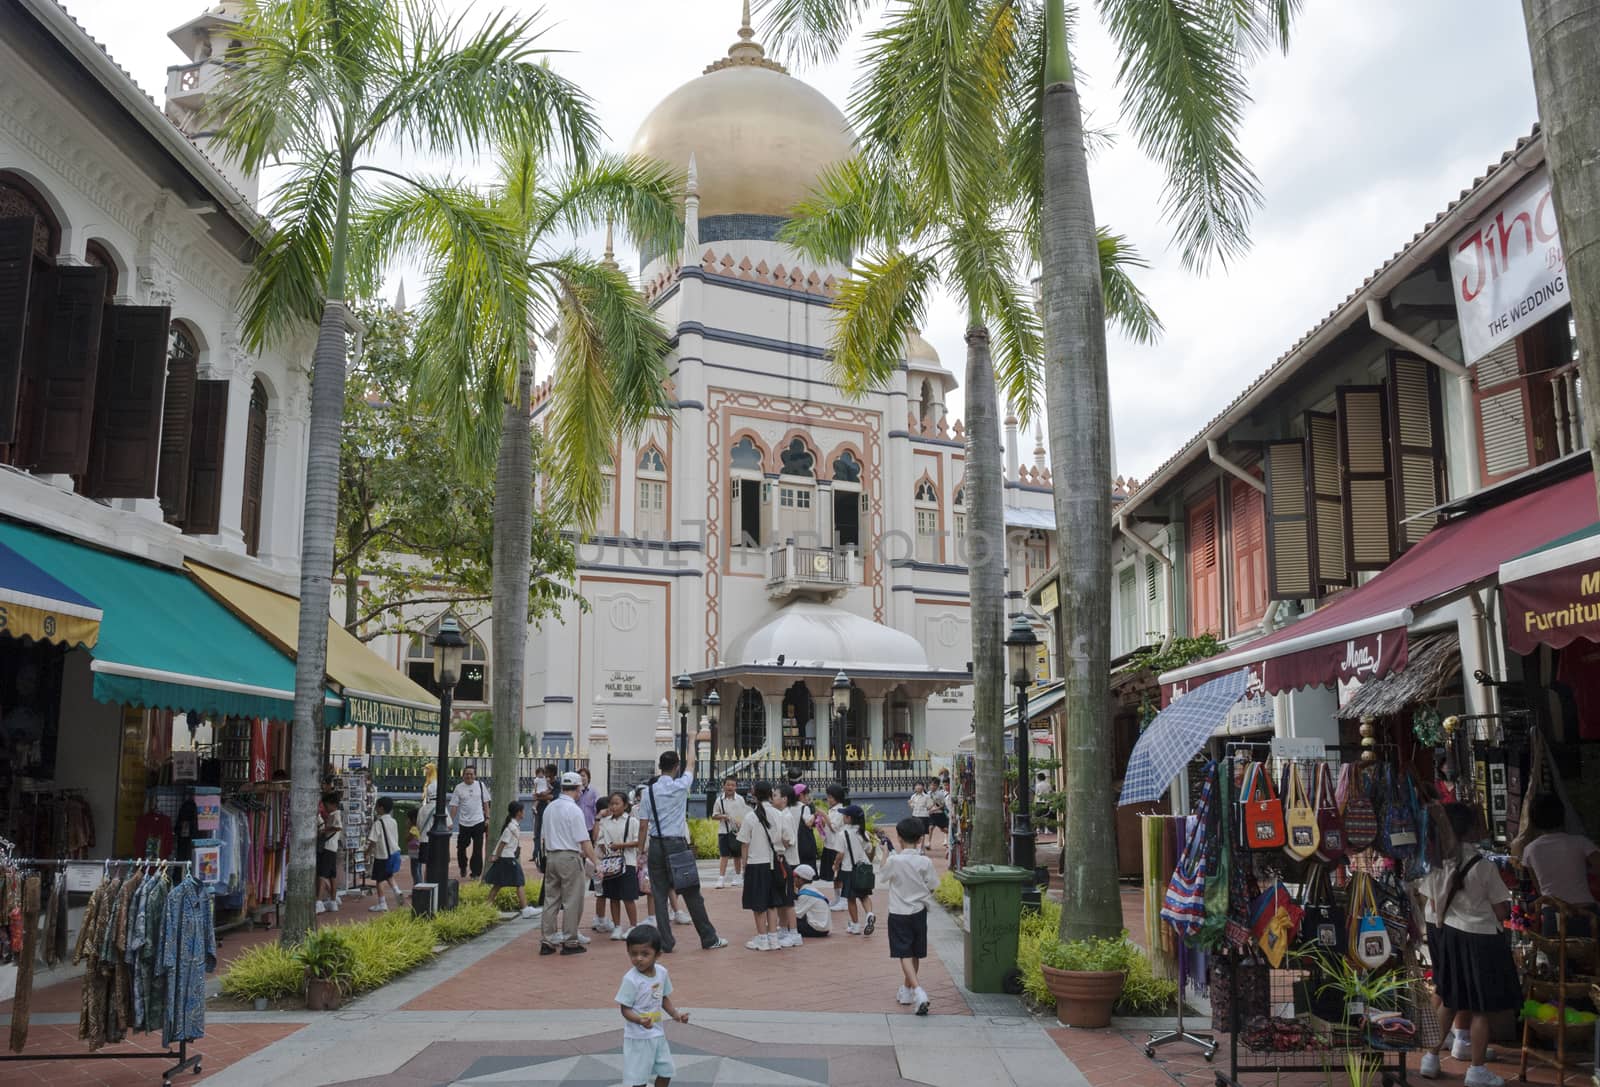 sultan mosk singapore by compuinfoto